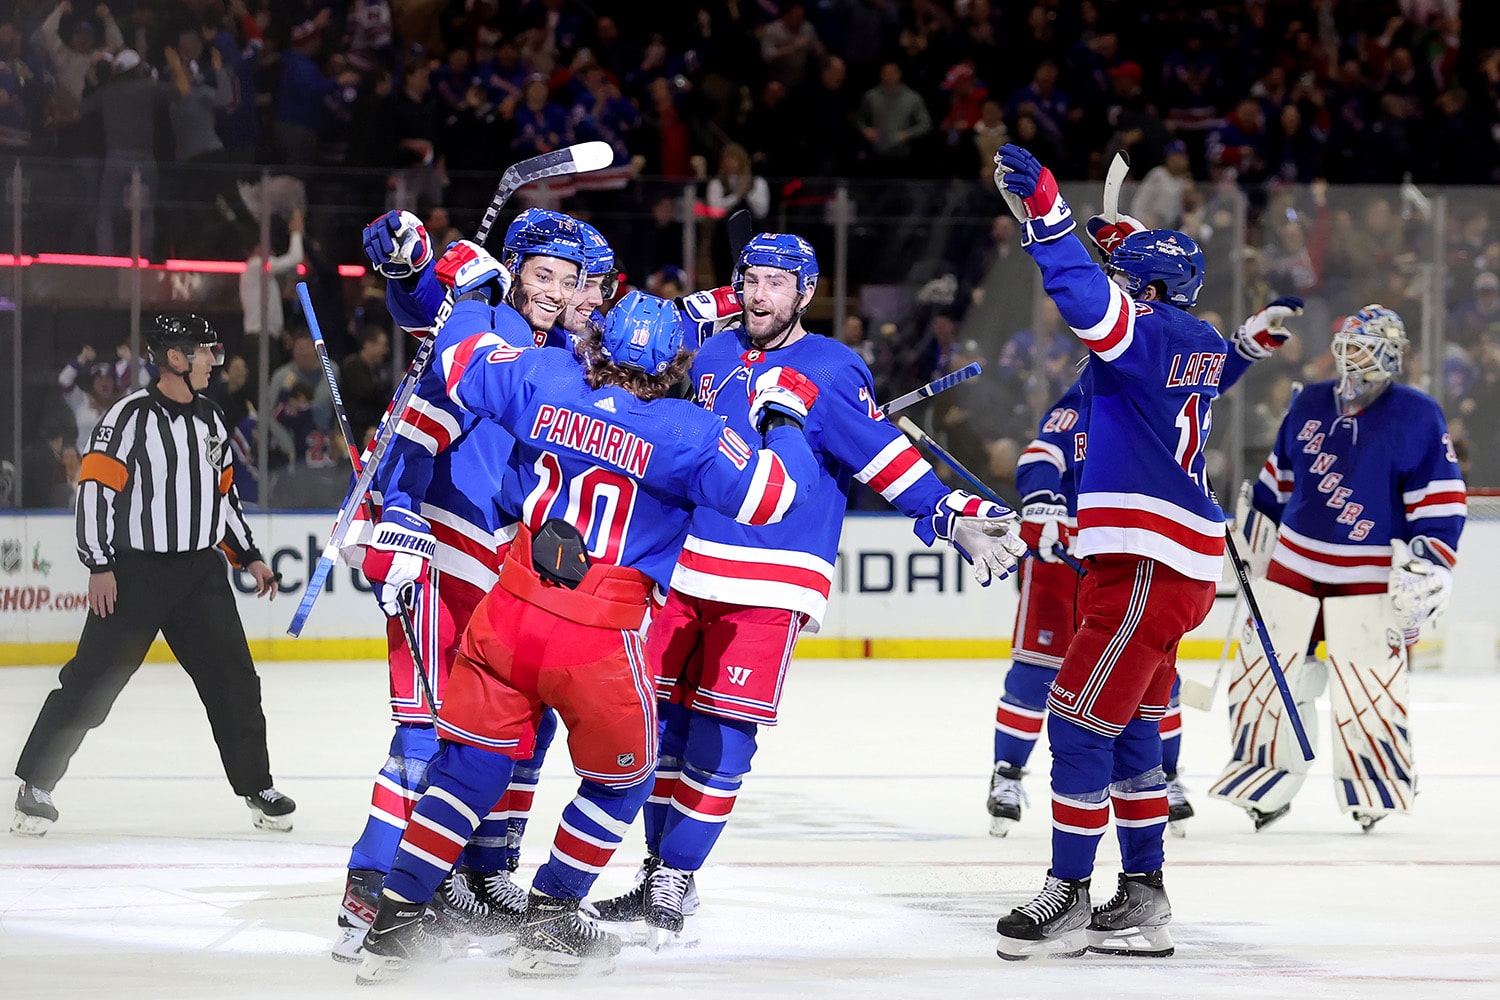 New York Rangers players celebrate together in the middle of the ice